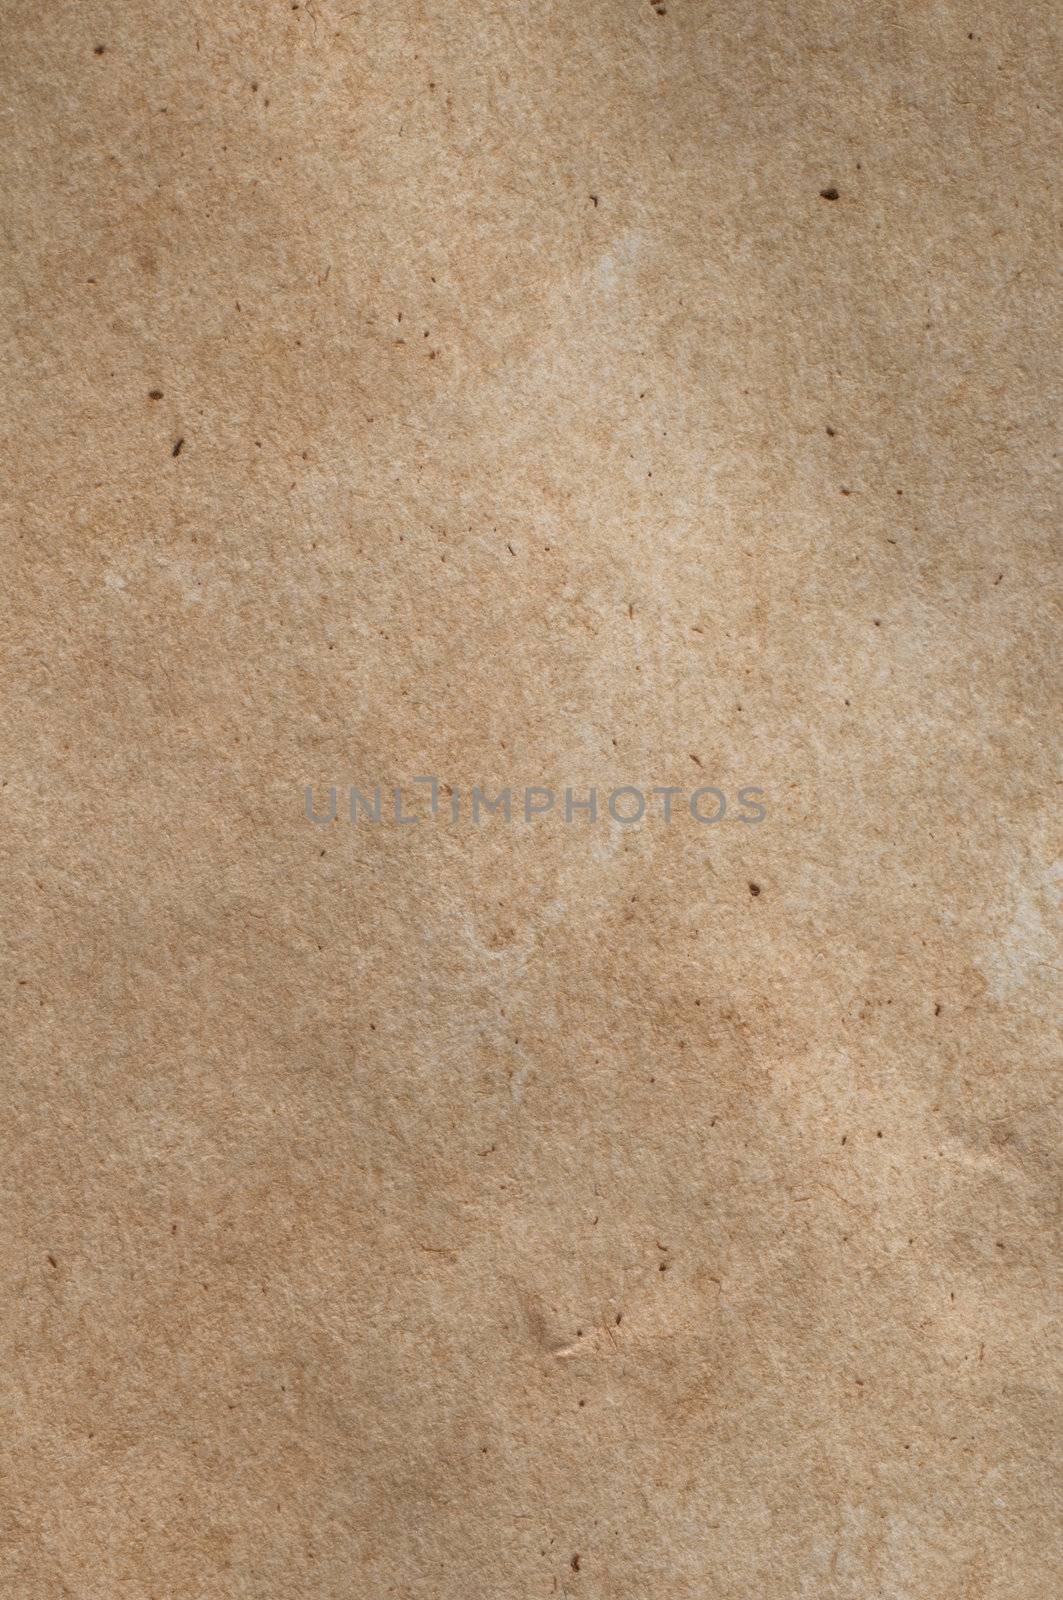 A piece of mid-toned fibrous, textured brown paper with scratches, fibres and flecks visible.